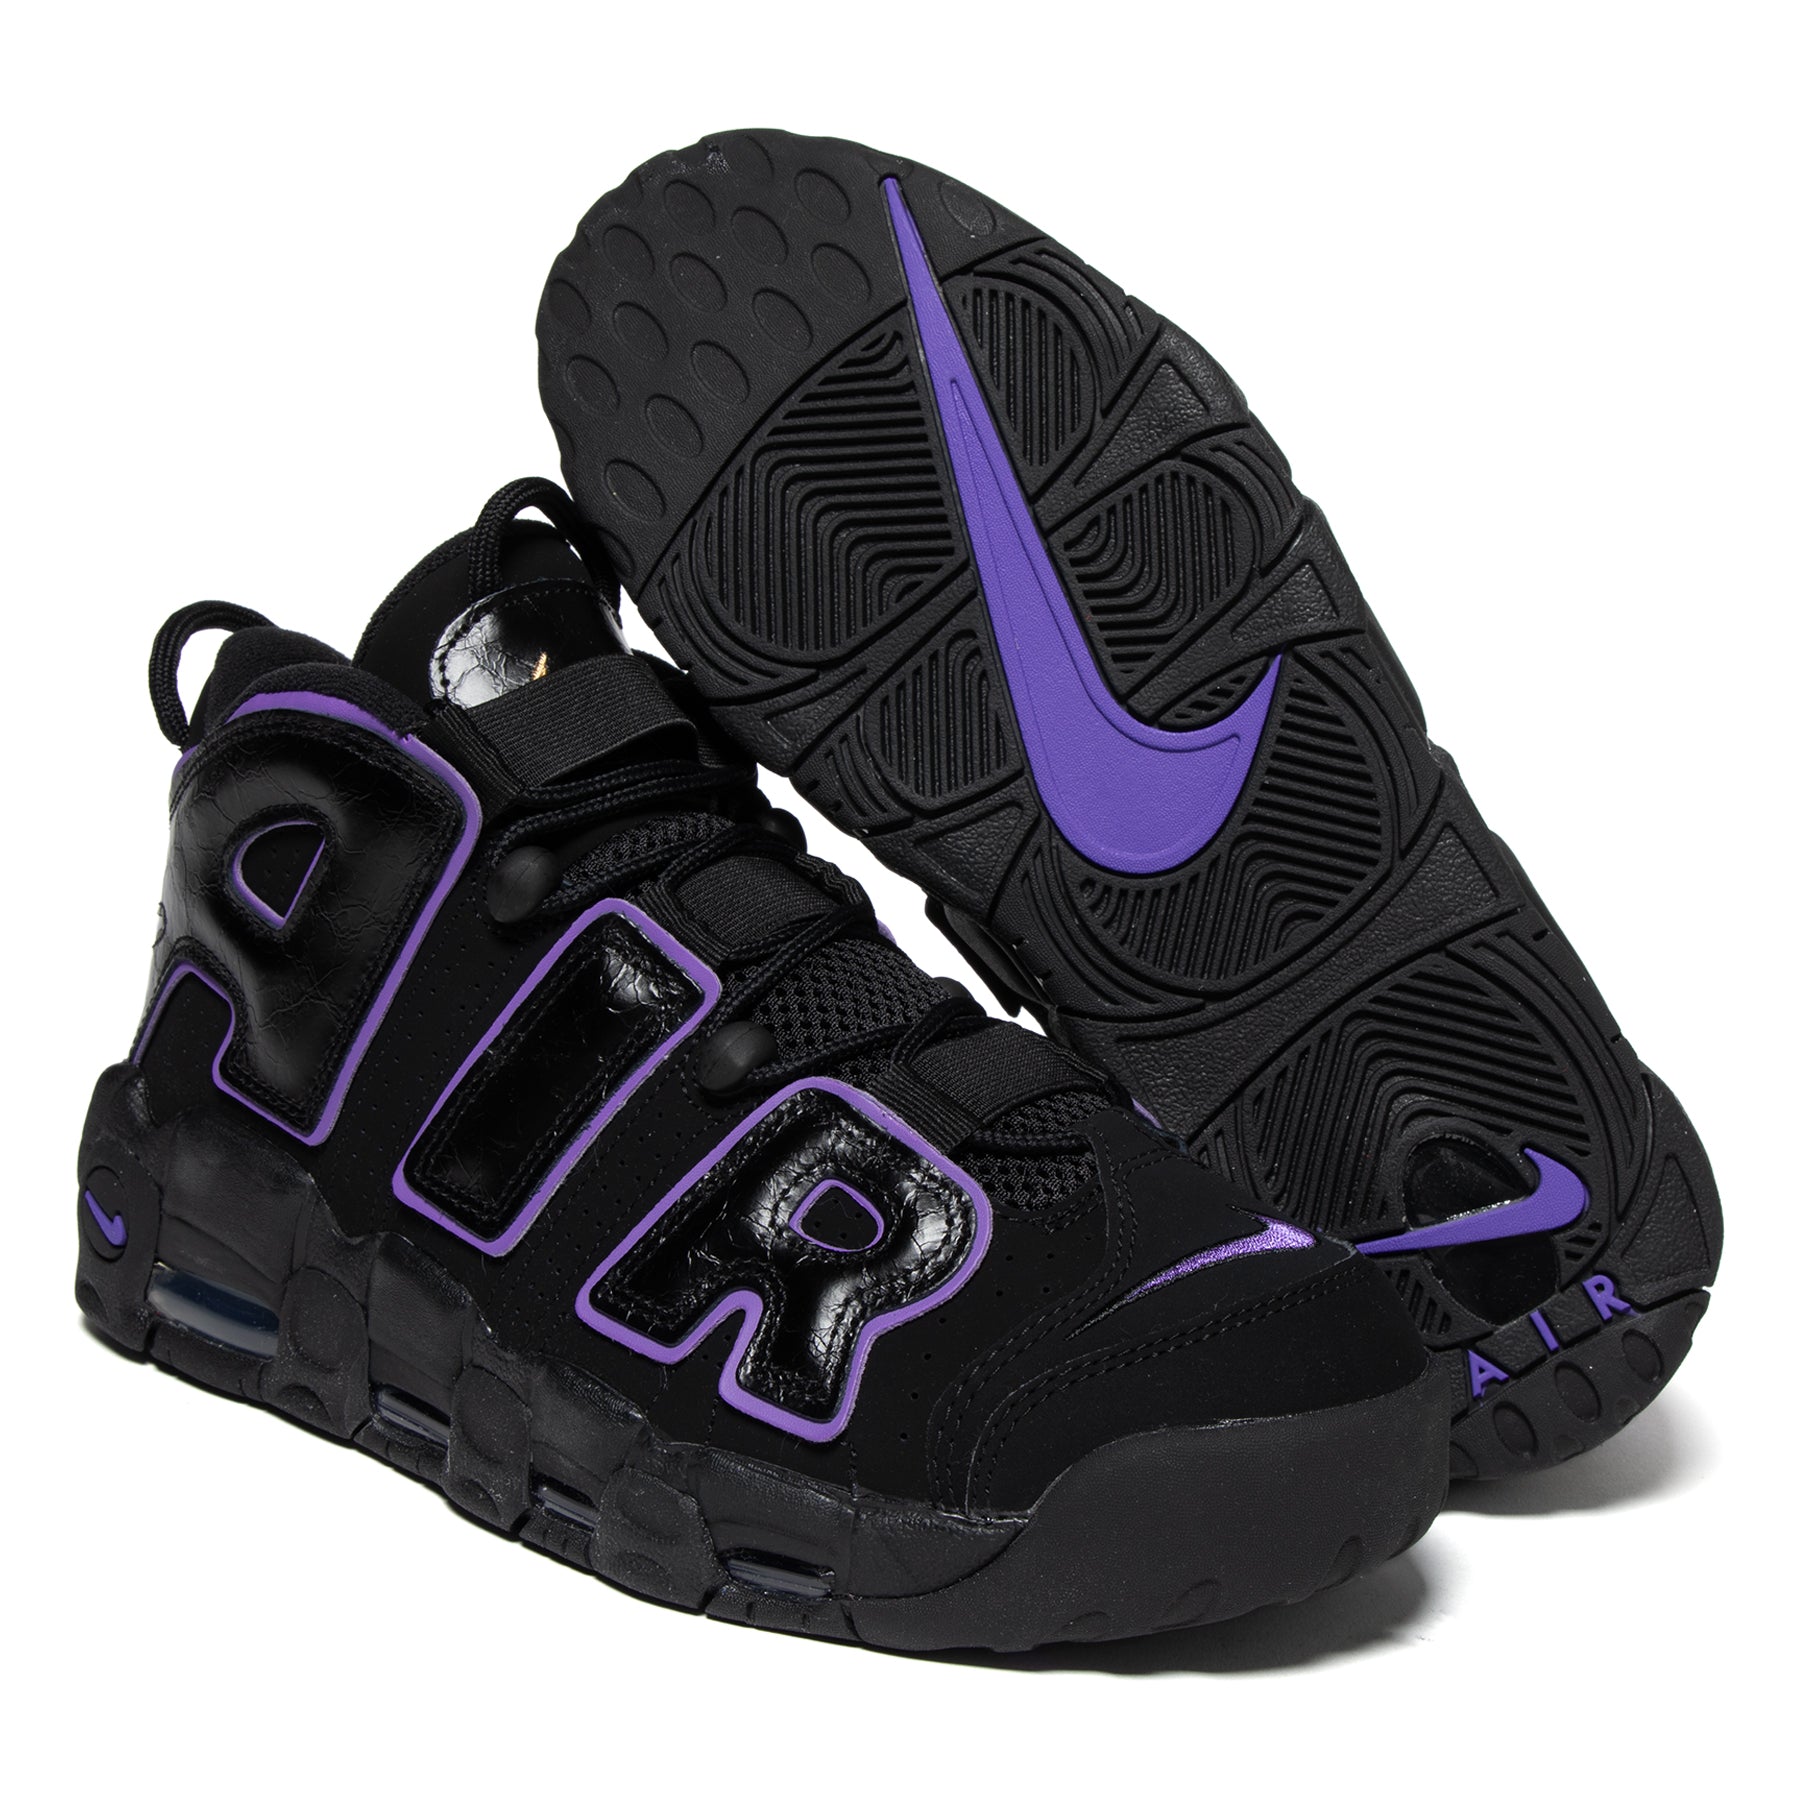 ON FOOT” NIKE AIR MORE UPTEMPO '96 (BLACK/ACTION GRAPE) 